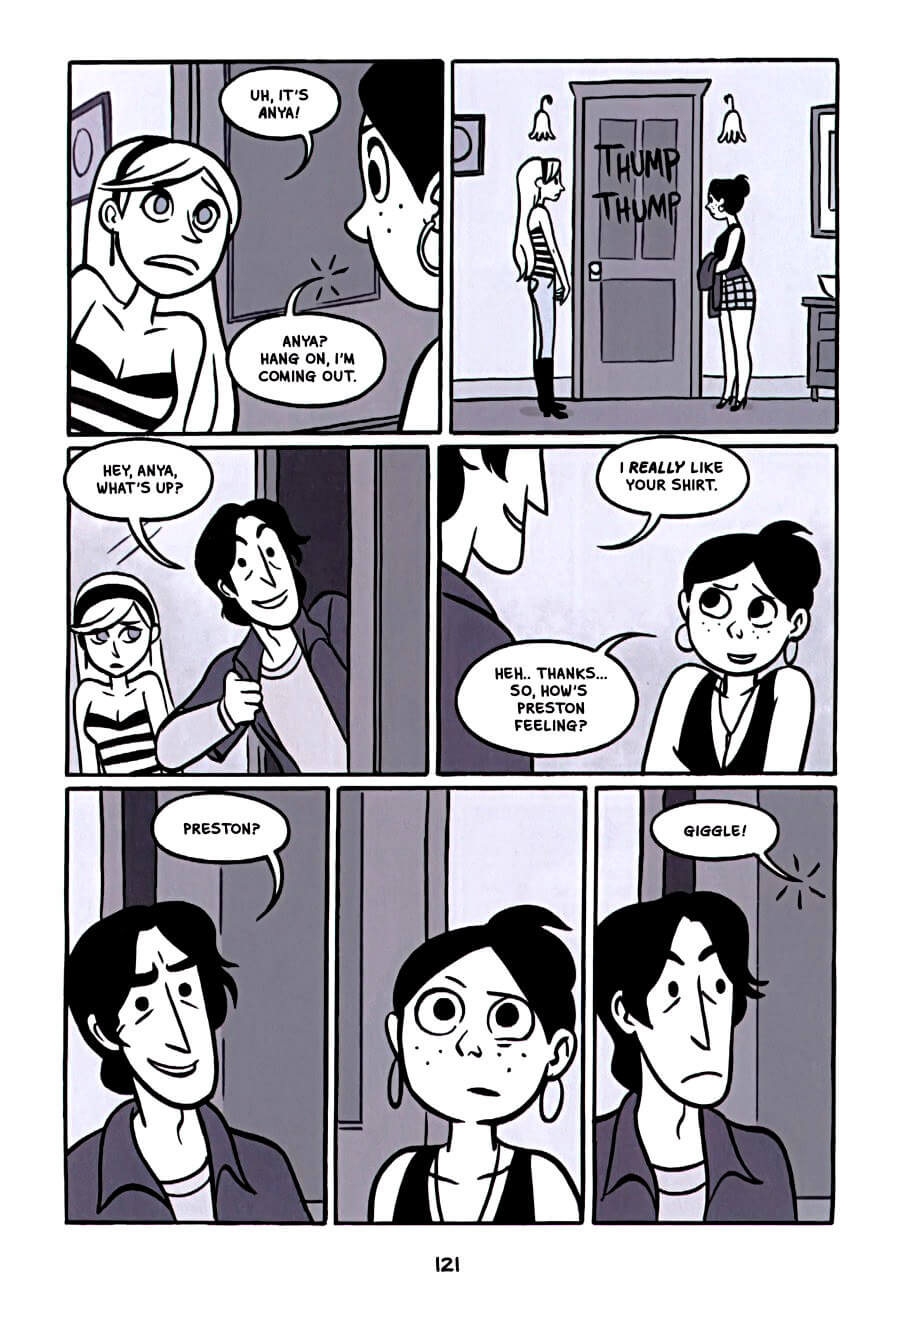 page 121 of anya's ghost graphic novel